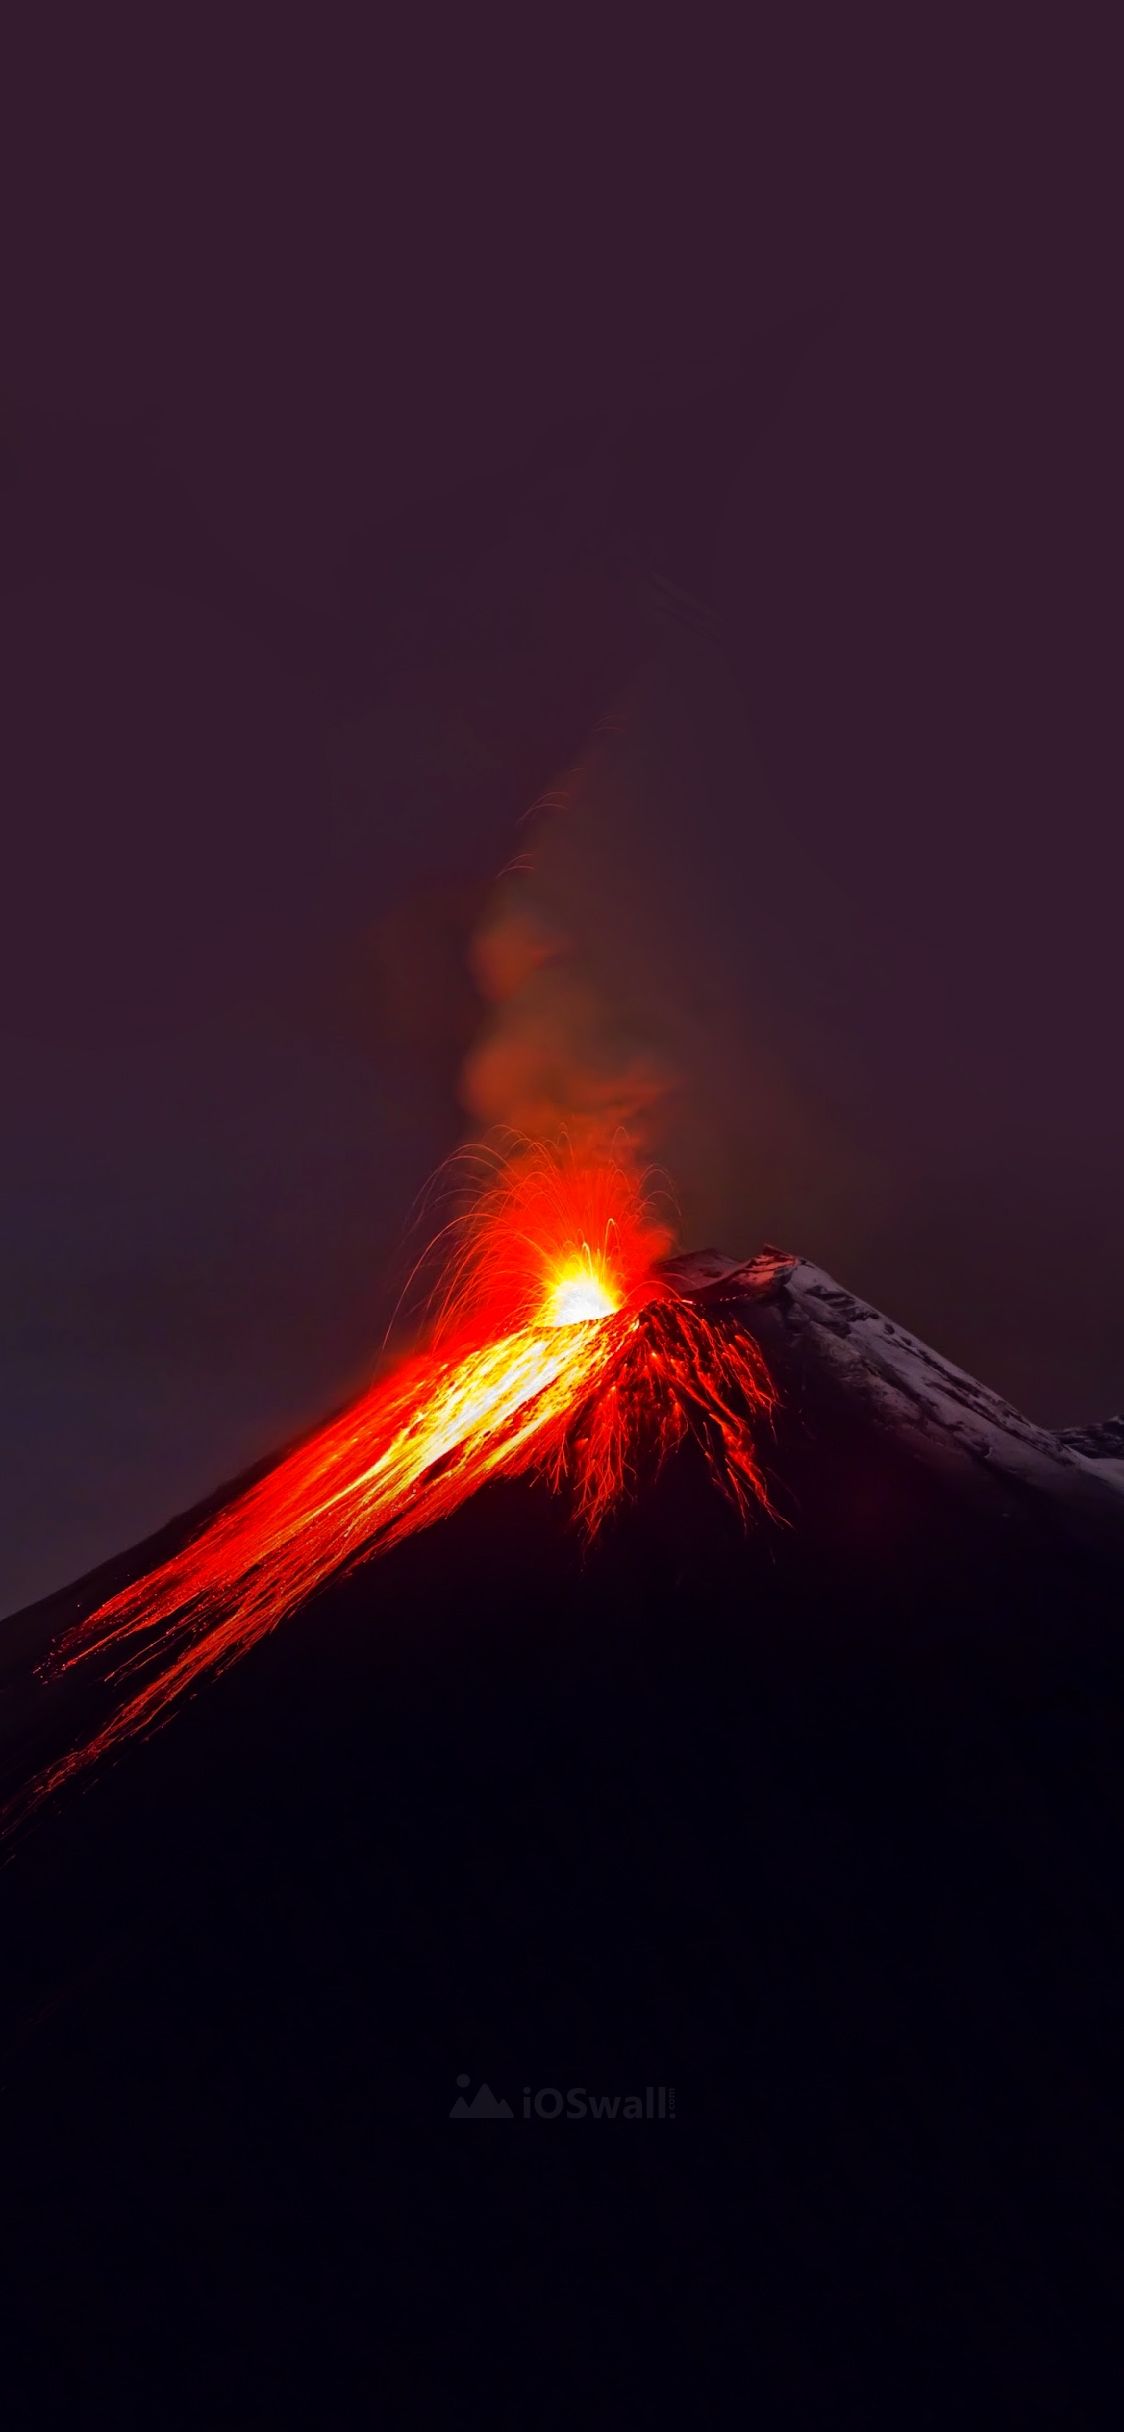 Best Volcano Wallpaper For Iphone X Ioswall Volcano - Volcano Eruption Wallpaper Iphone , HD Wallpaper & Backgrounds